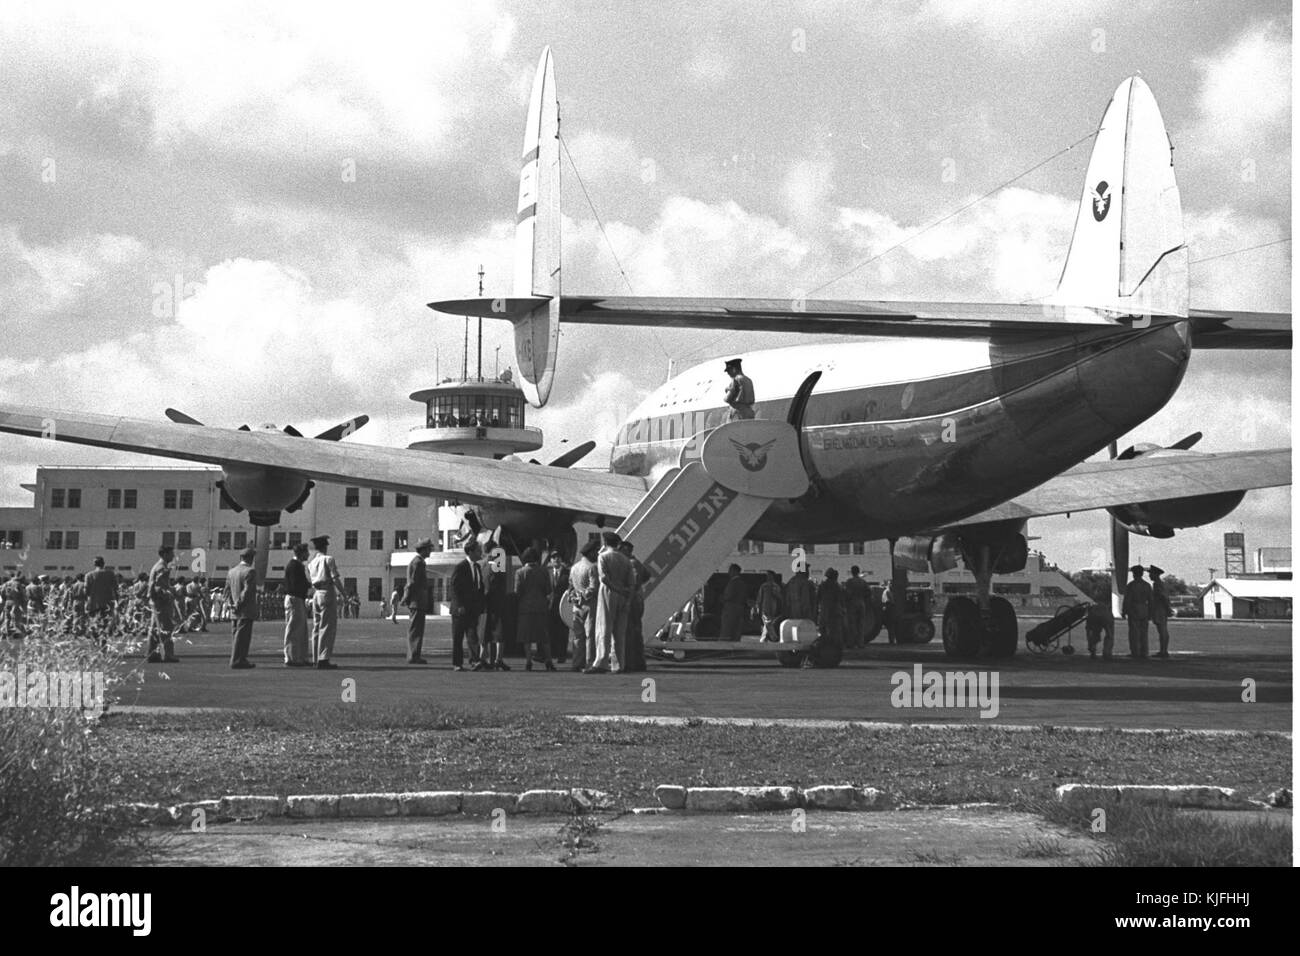 Lockheed Constellation Banque D Image Et Photos Page 2 Alamy